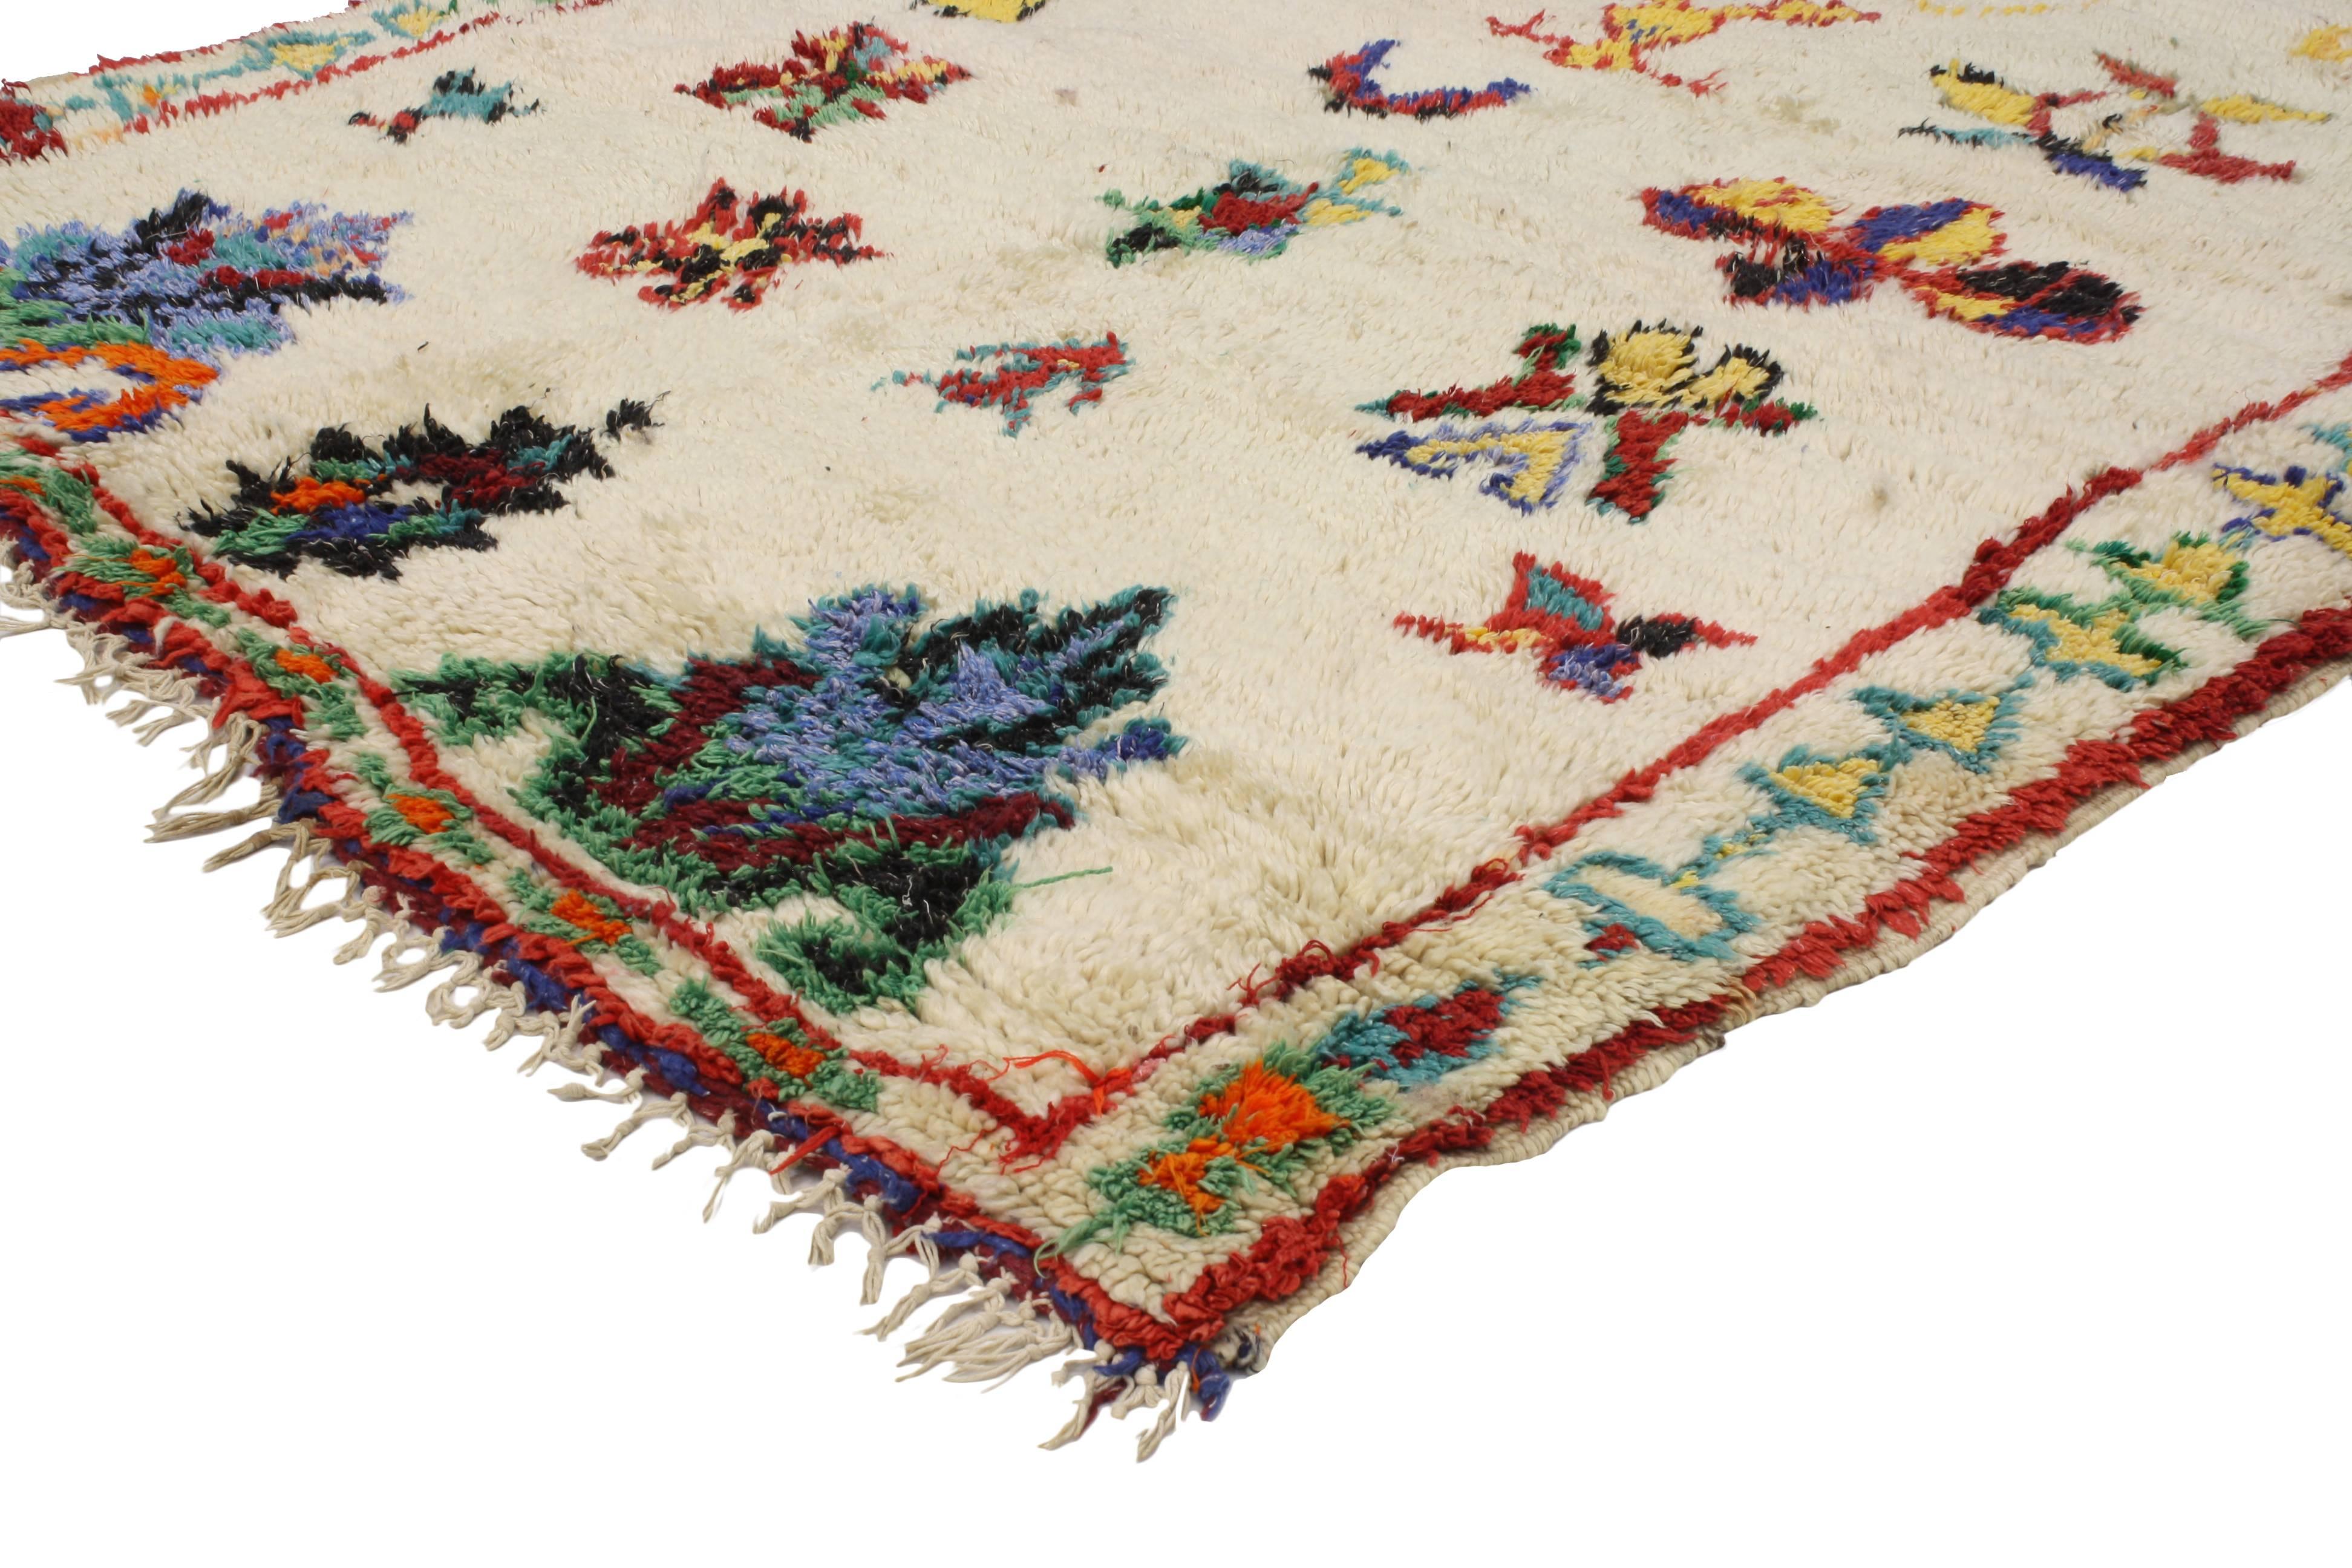 20493 Vintage Berber Moroccan Azilal Rug with Bohemian Tribal Style. This hand-knotted wool vintage Berber Moroccan Azilal rug hosts various protection and reproductive symbols that come together into a network that is both meaningful and elegant. 